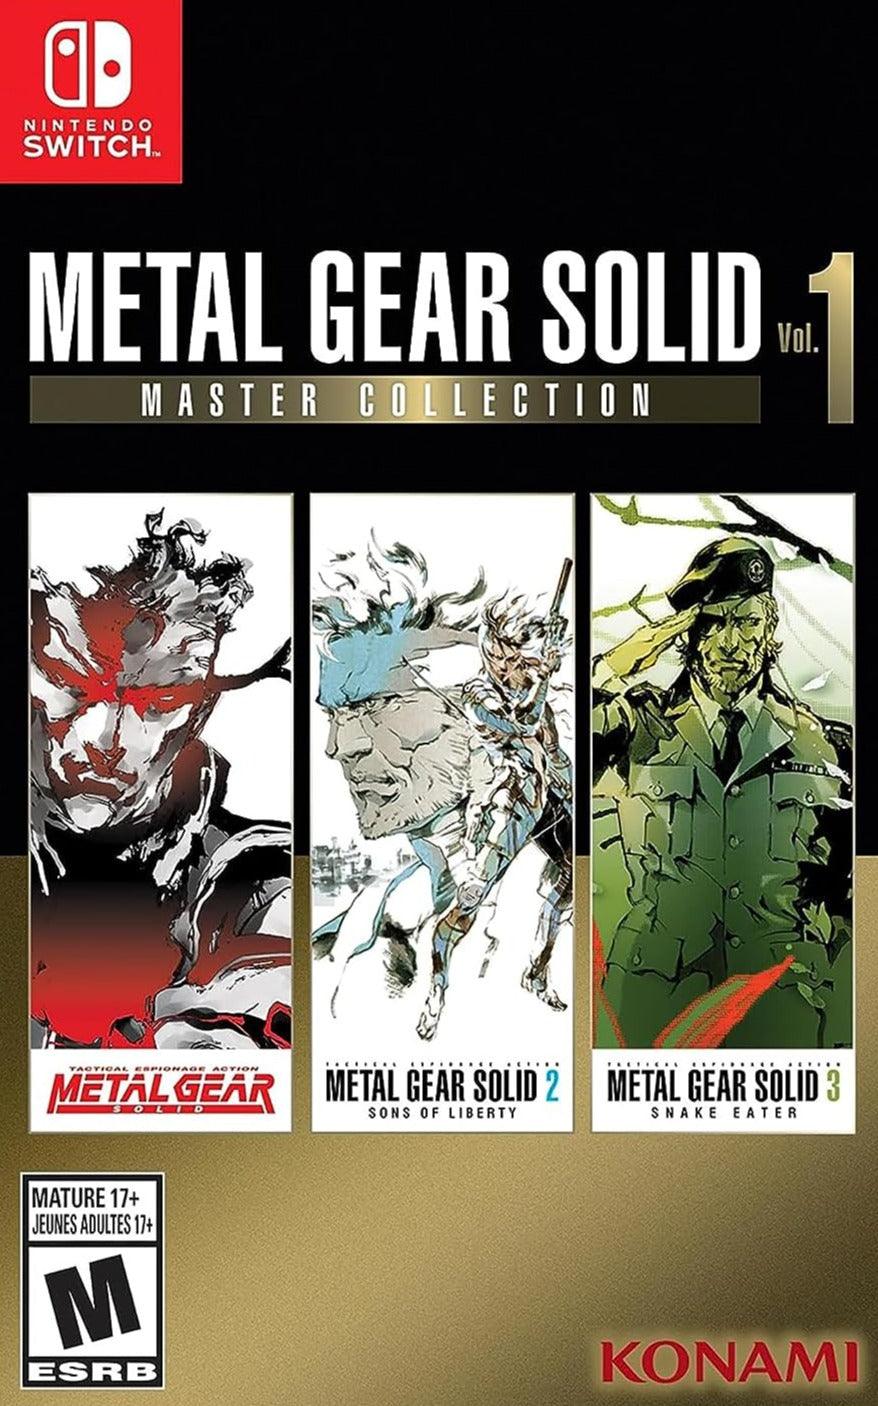 Metal Gear Solid Master Collection Vol. 1 - Nintendo Switch - GD Games 